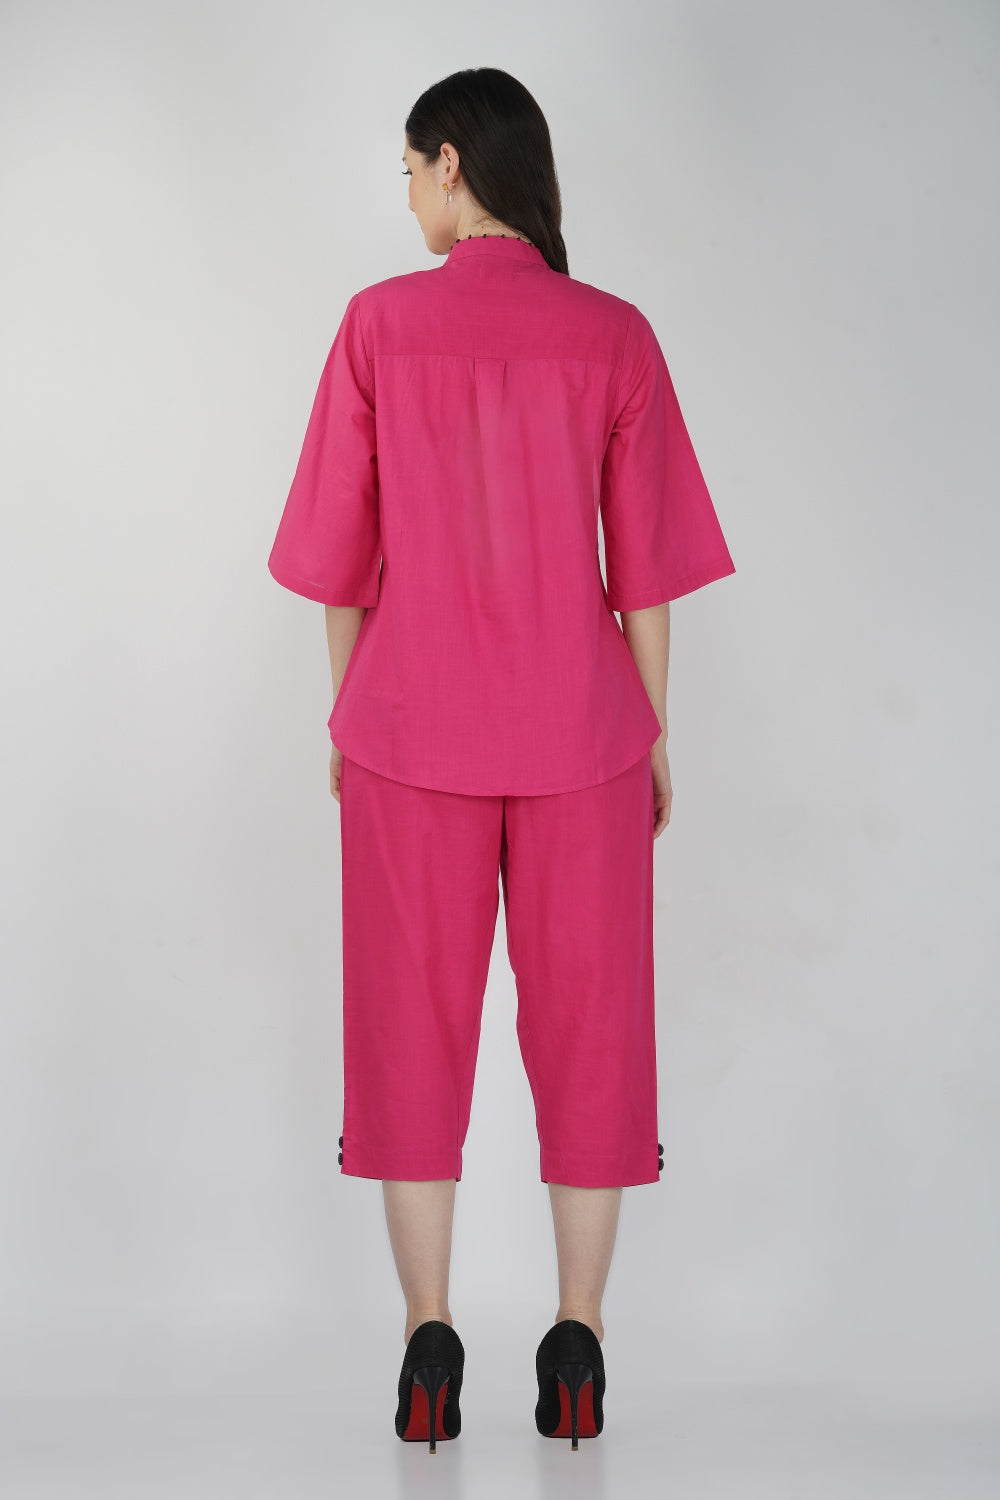 Tiara Co-ord Set
- Solid Colour Beetroot Pink